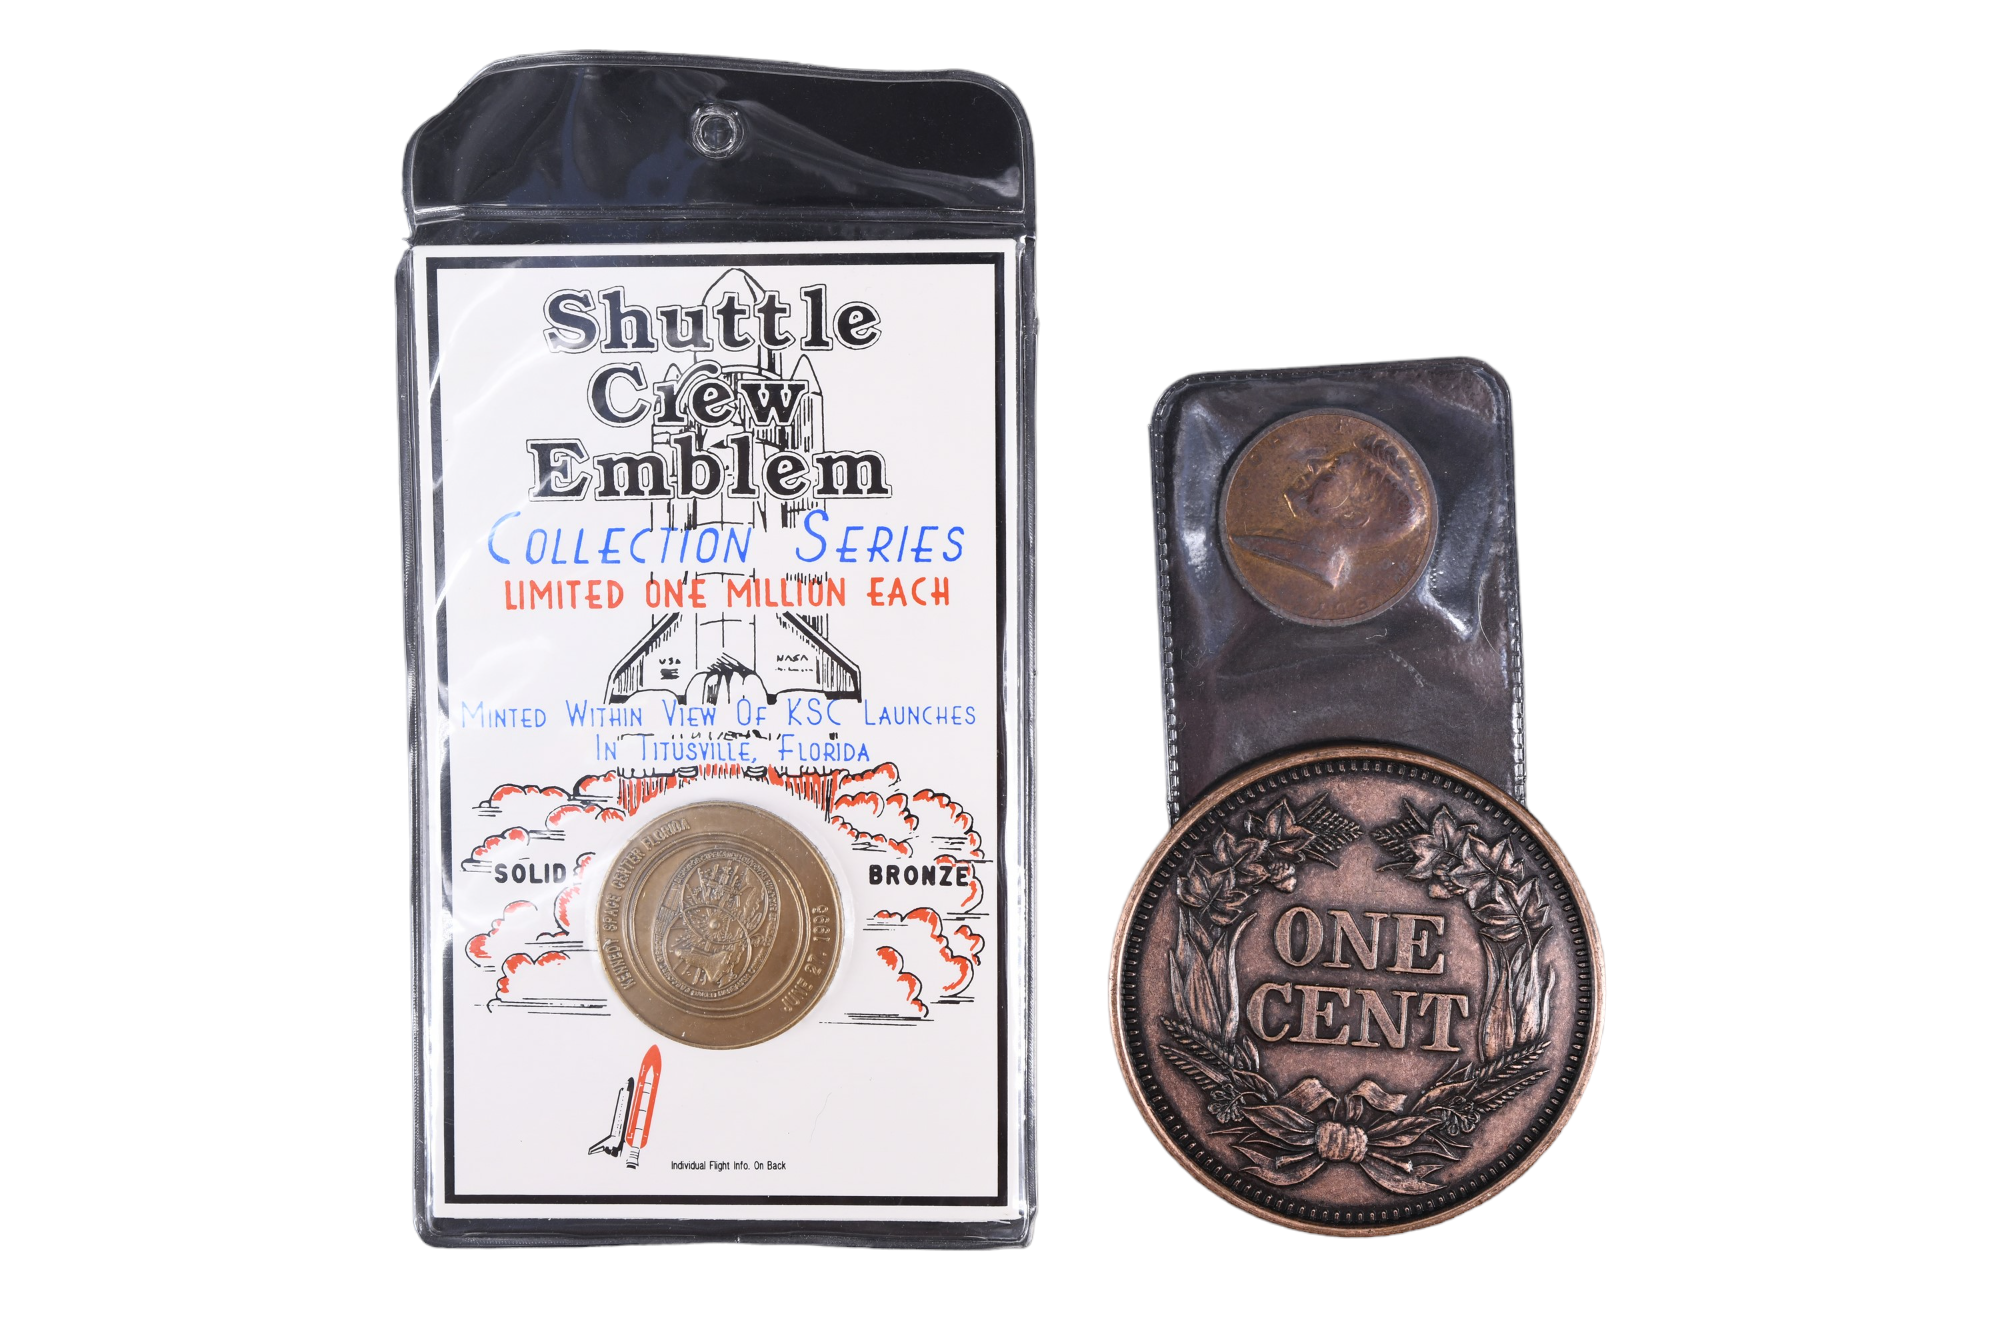 A 1961 John F. Kennedy presidential inauguration token together with a 1995 Shuttle Crew Emblem